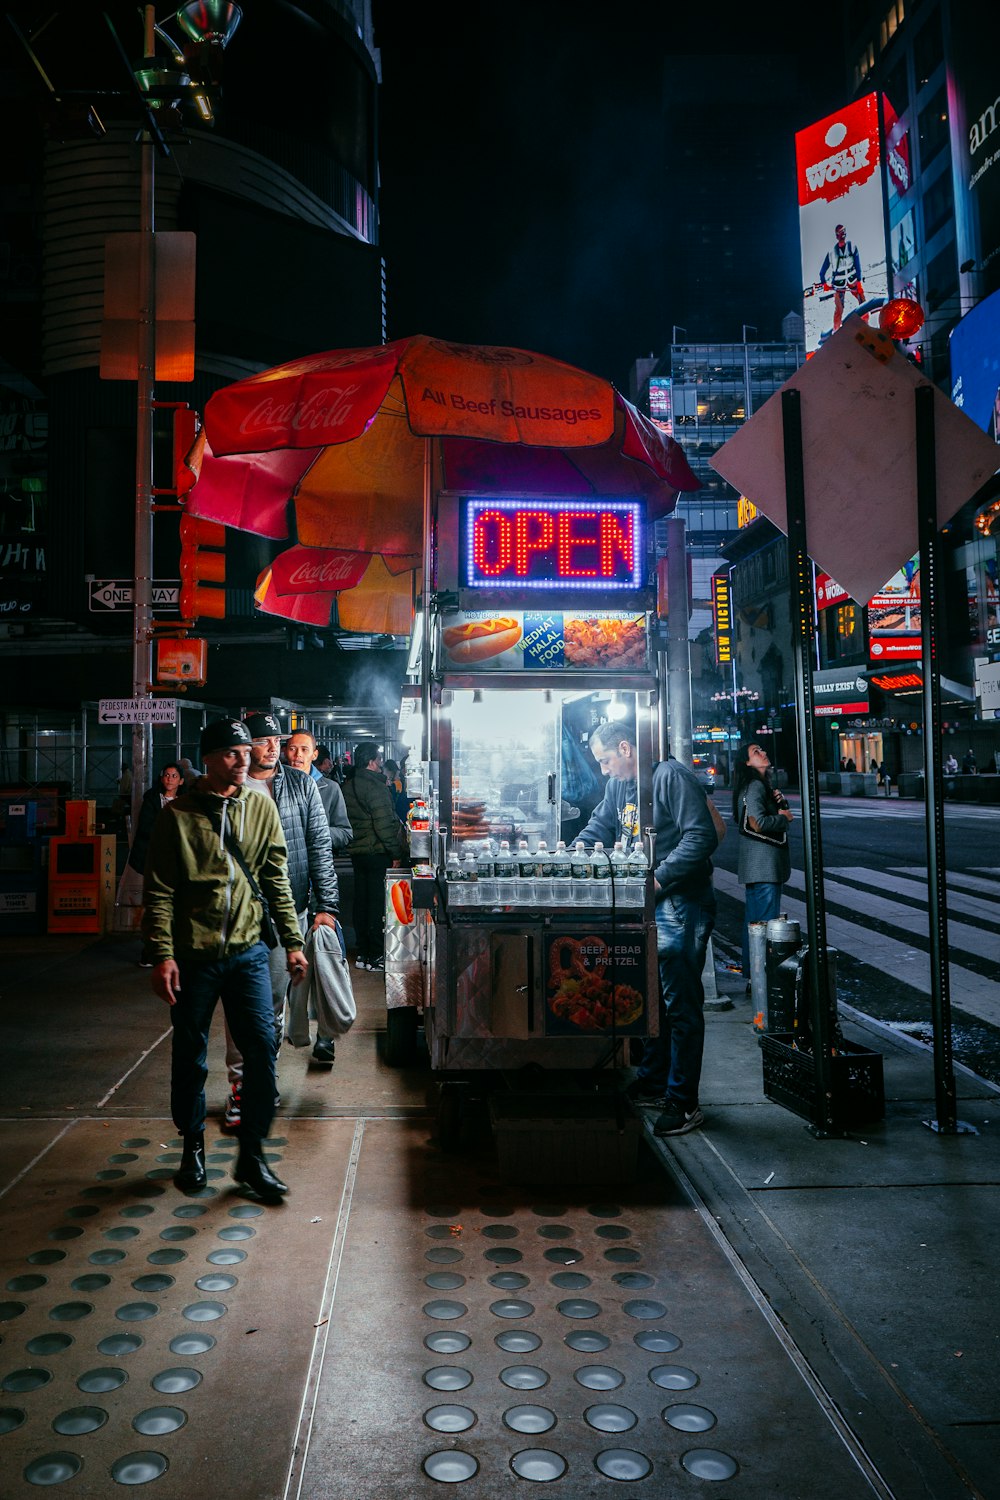 a group of people standing around a food cart